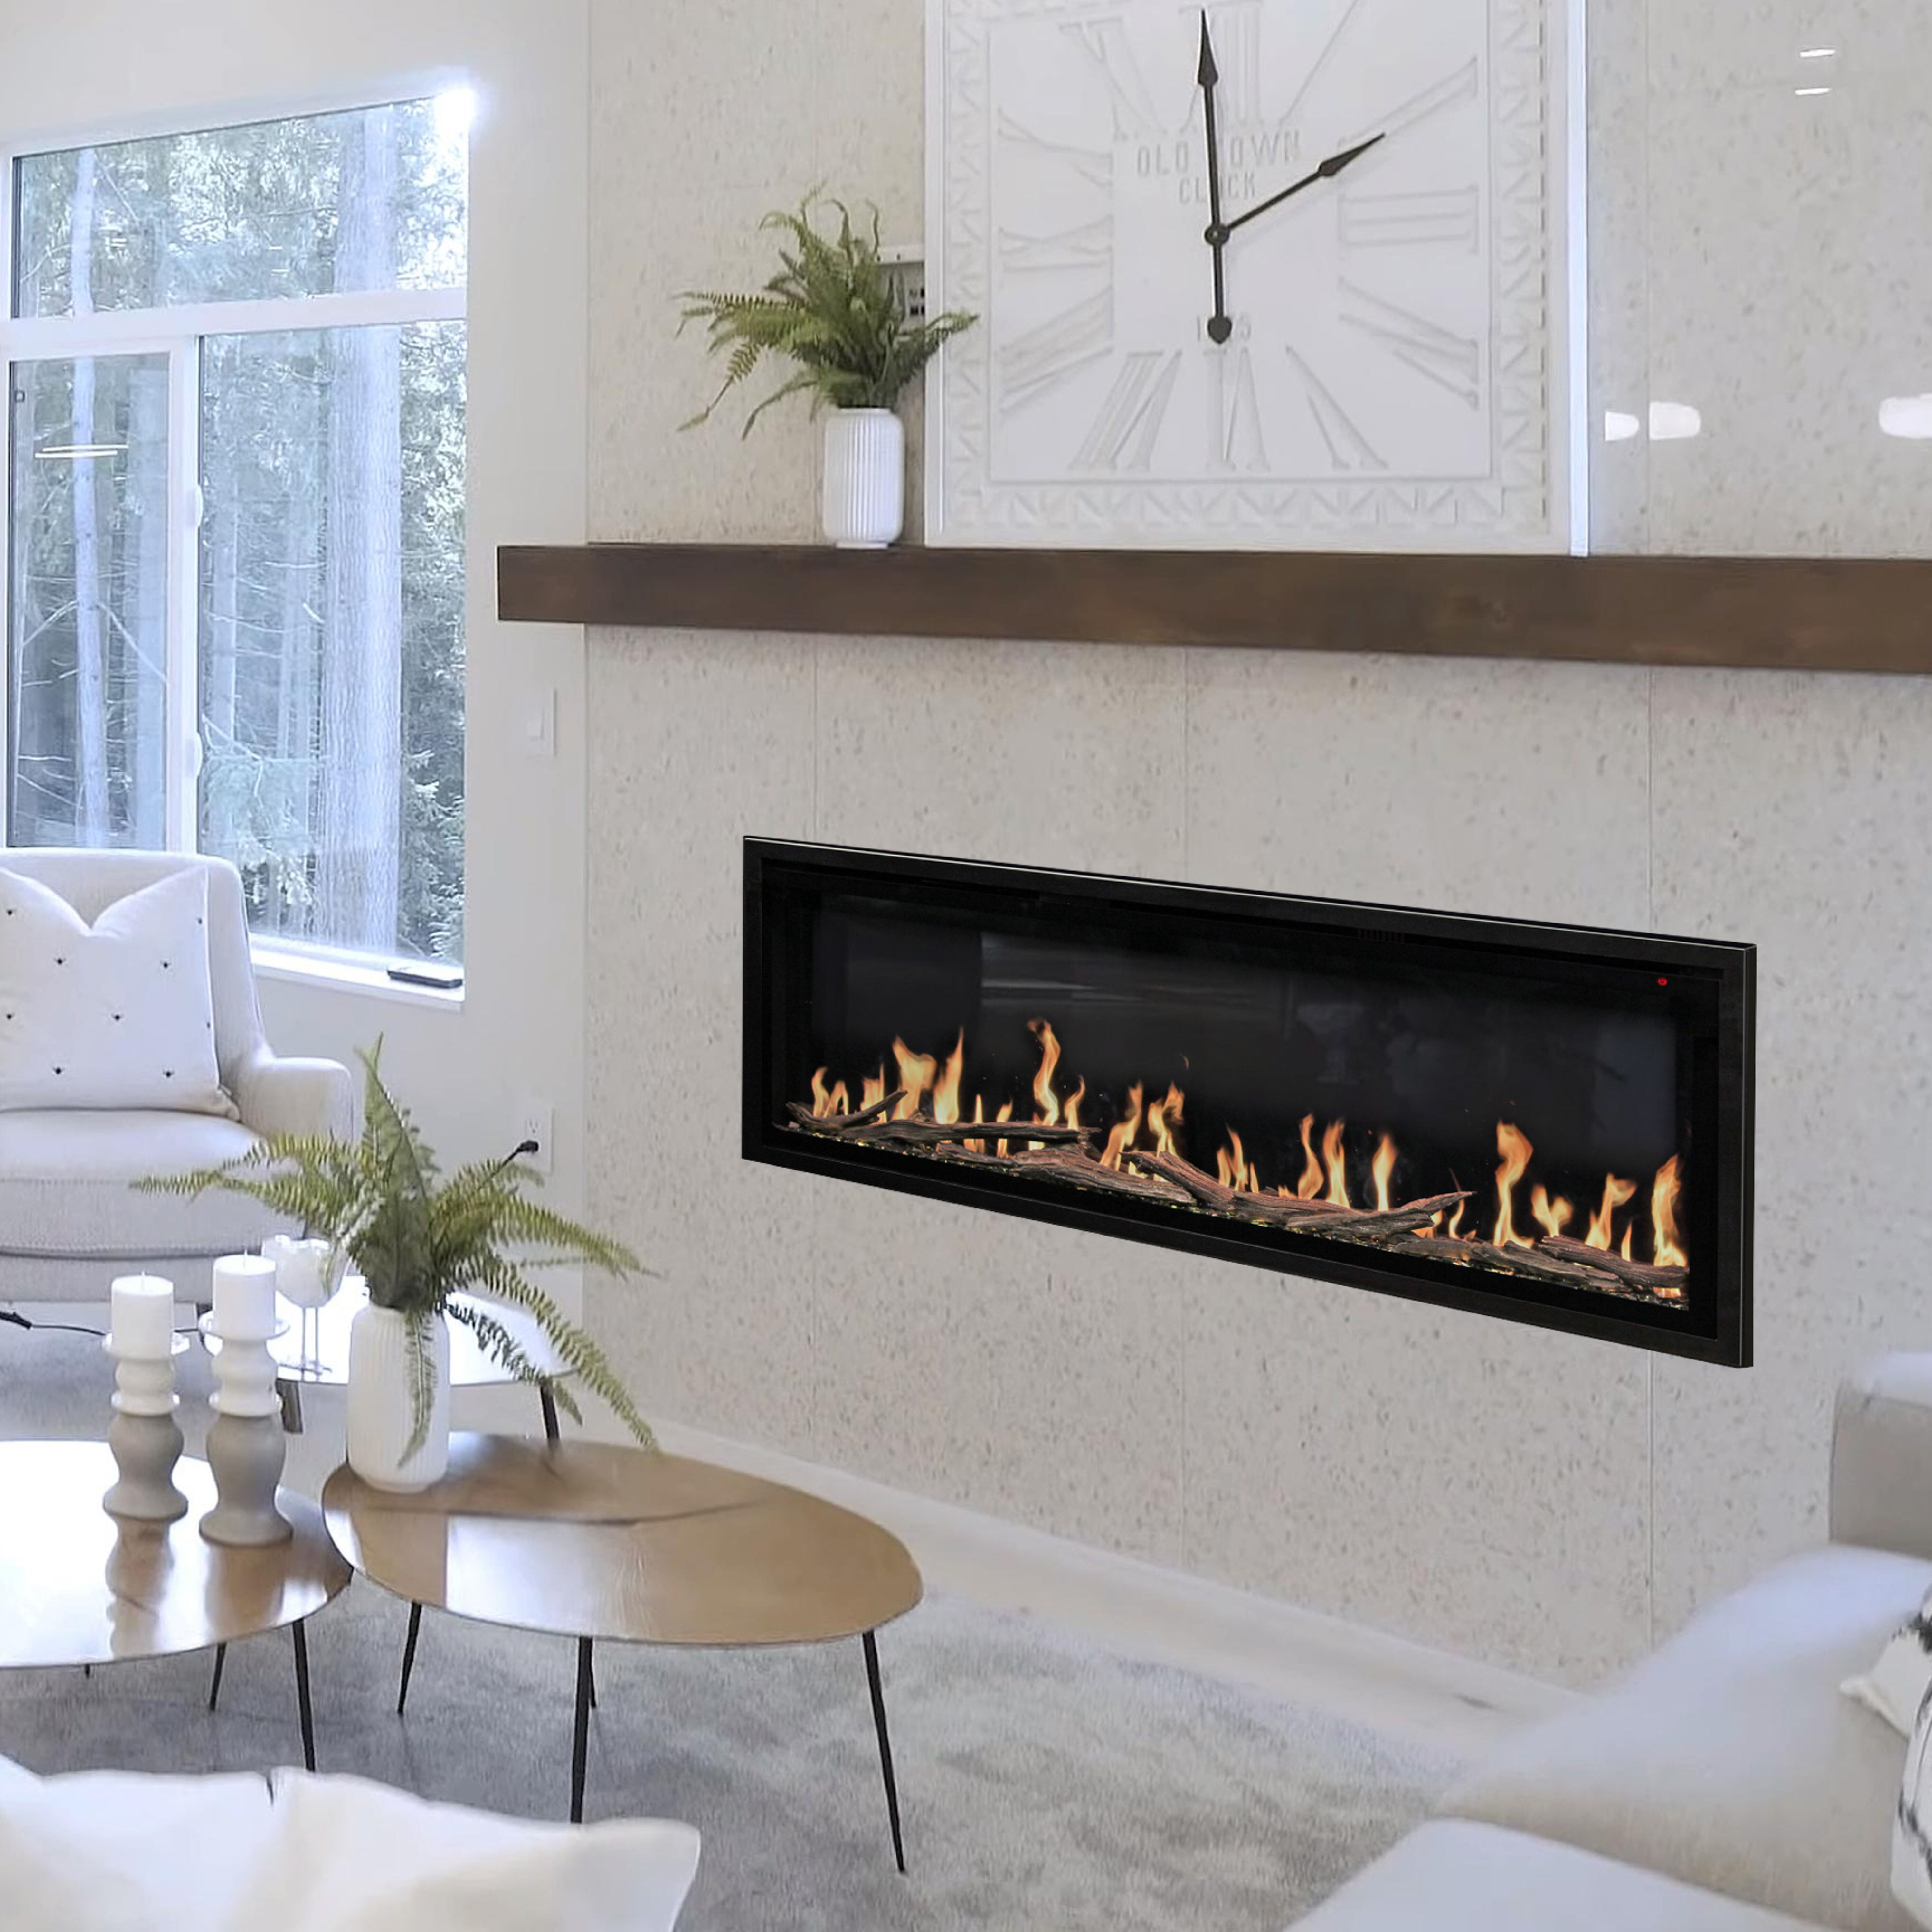 The Modern Flames Landscape Pro Slim Linear Electric Fireplace features lifelike electric flames, multi-colored lighting, and remote controls